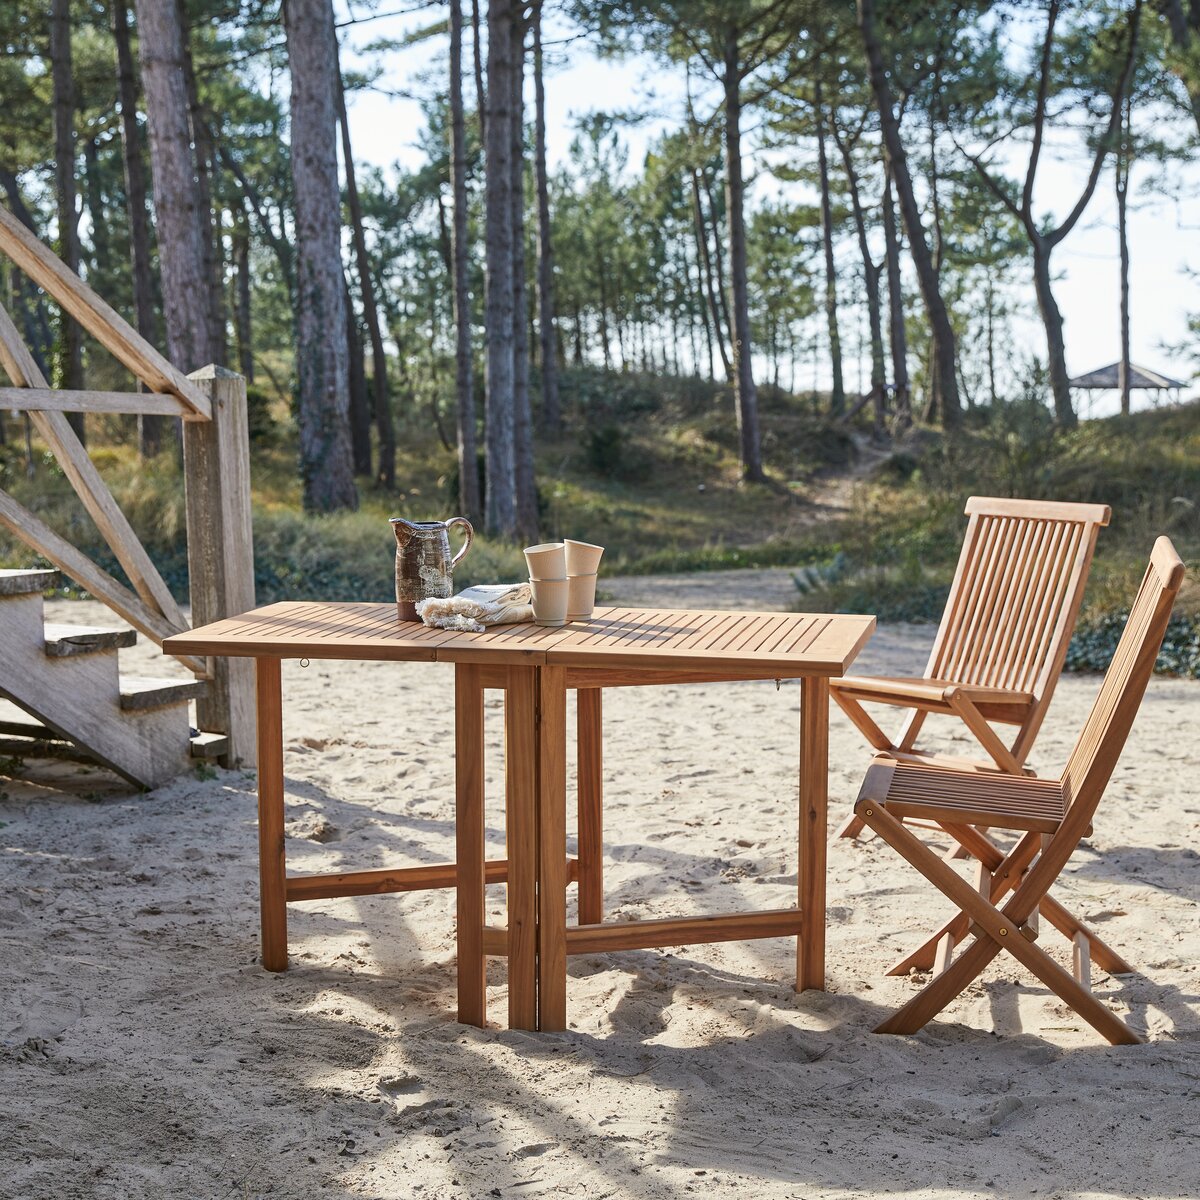 Capri - Folding garden table in solid acacia for 2/4 people